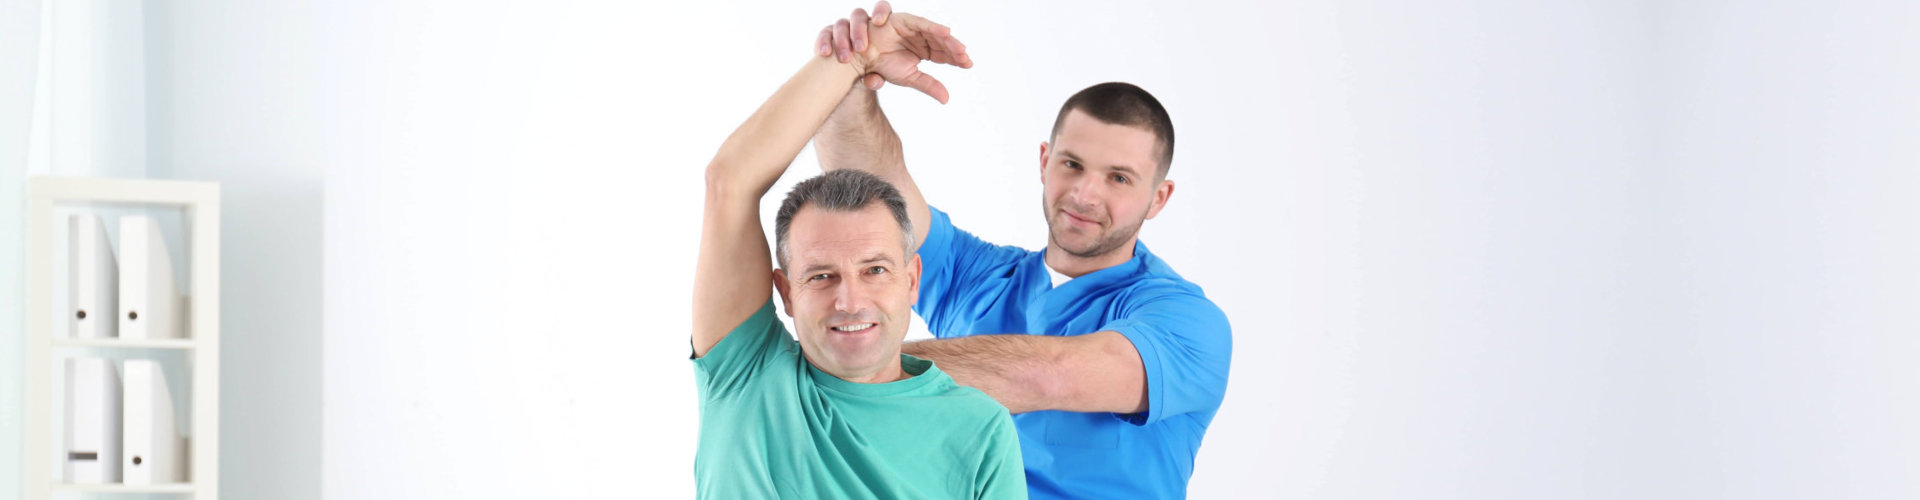 caregiver conducting physical therapy